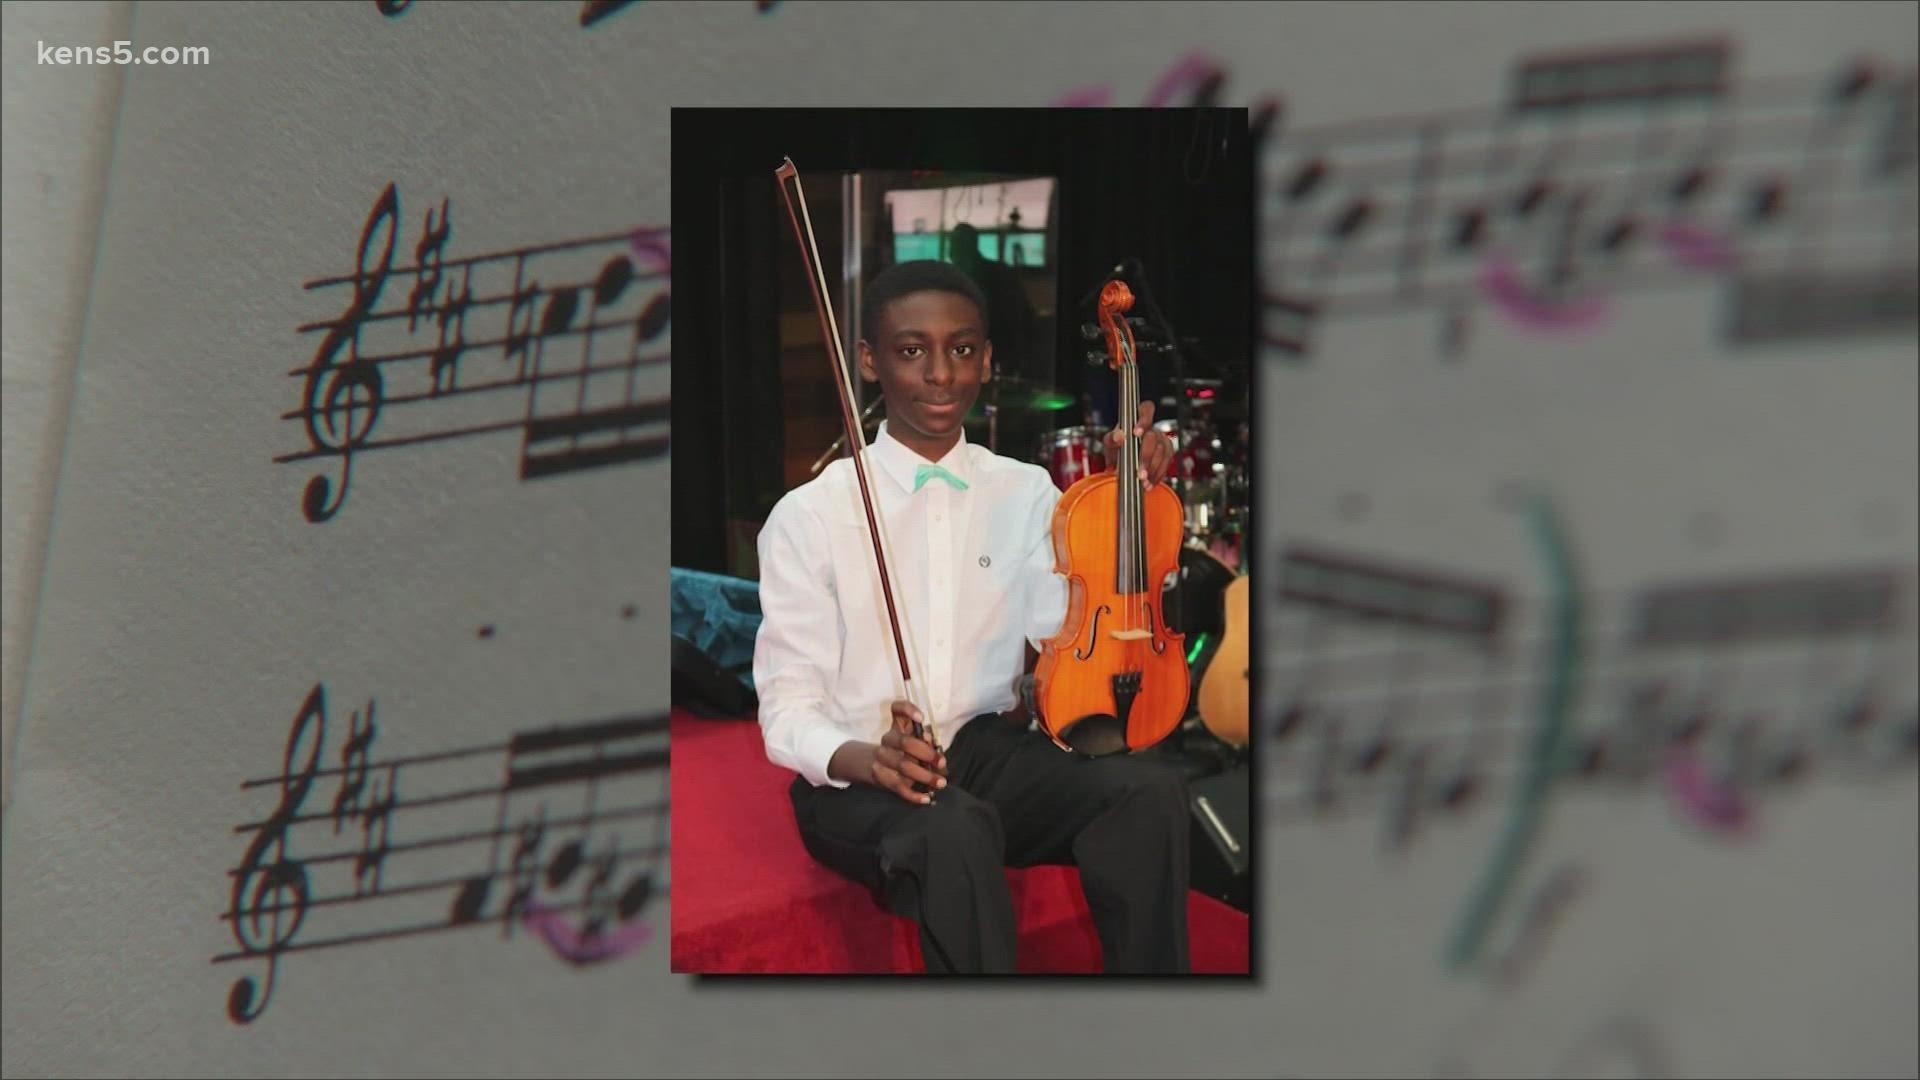 After mostly teaching himself through YouTube videos, this San Antonio teen went on to play at Carnegie Hall in just three years.